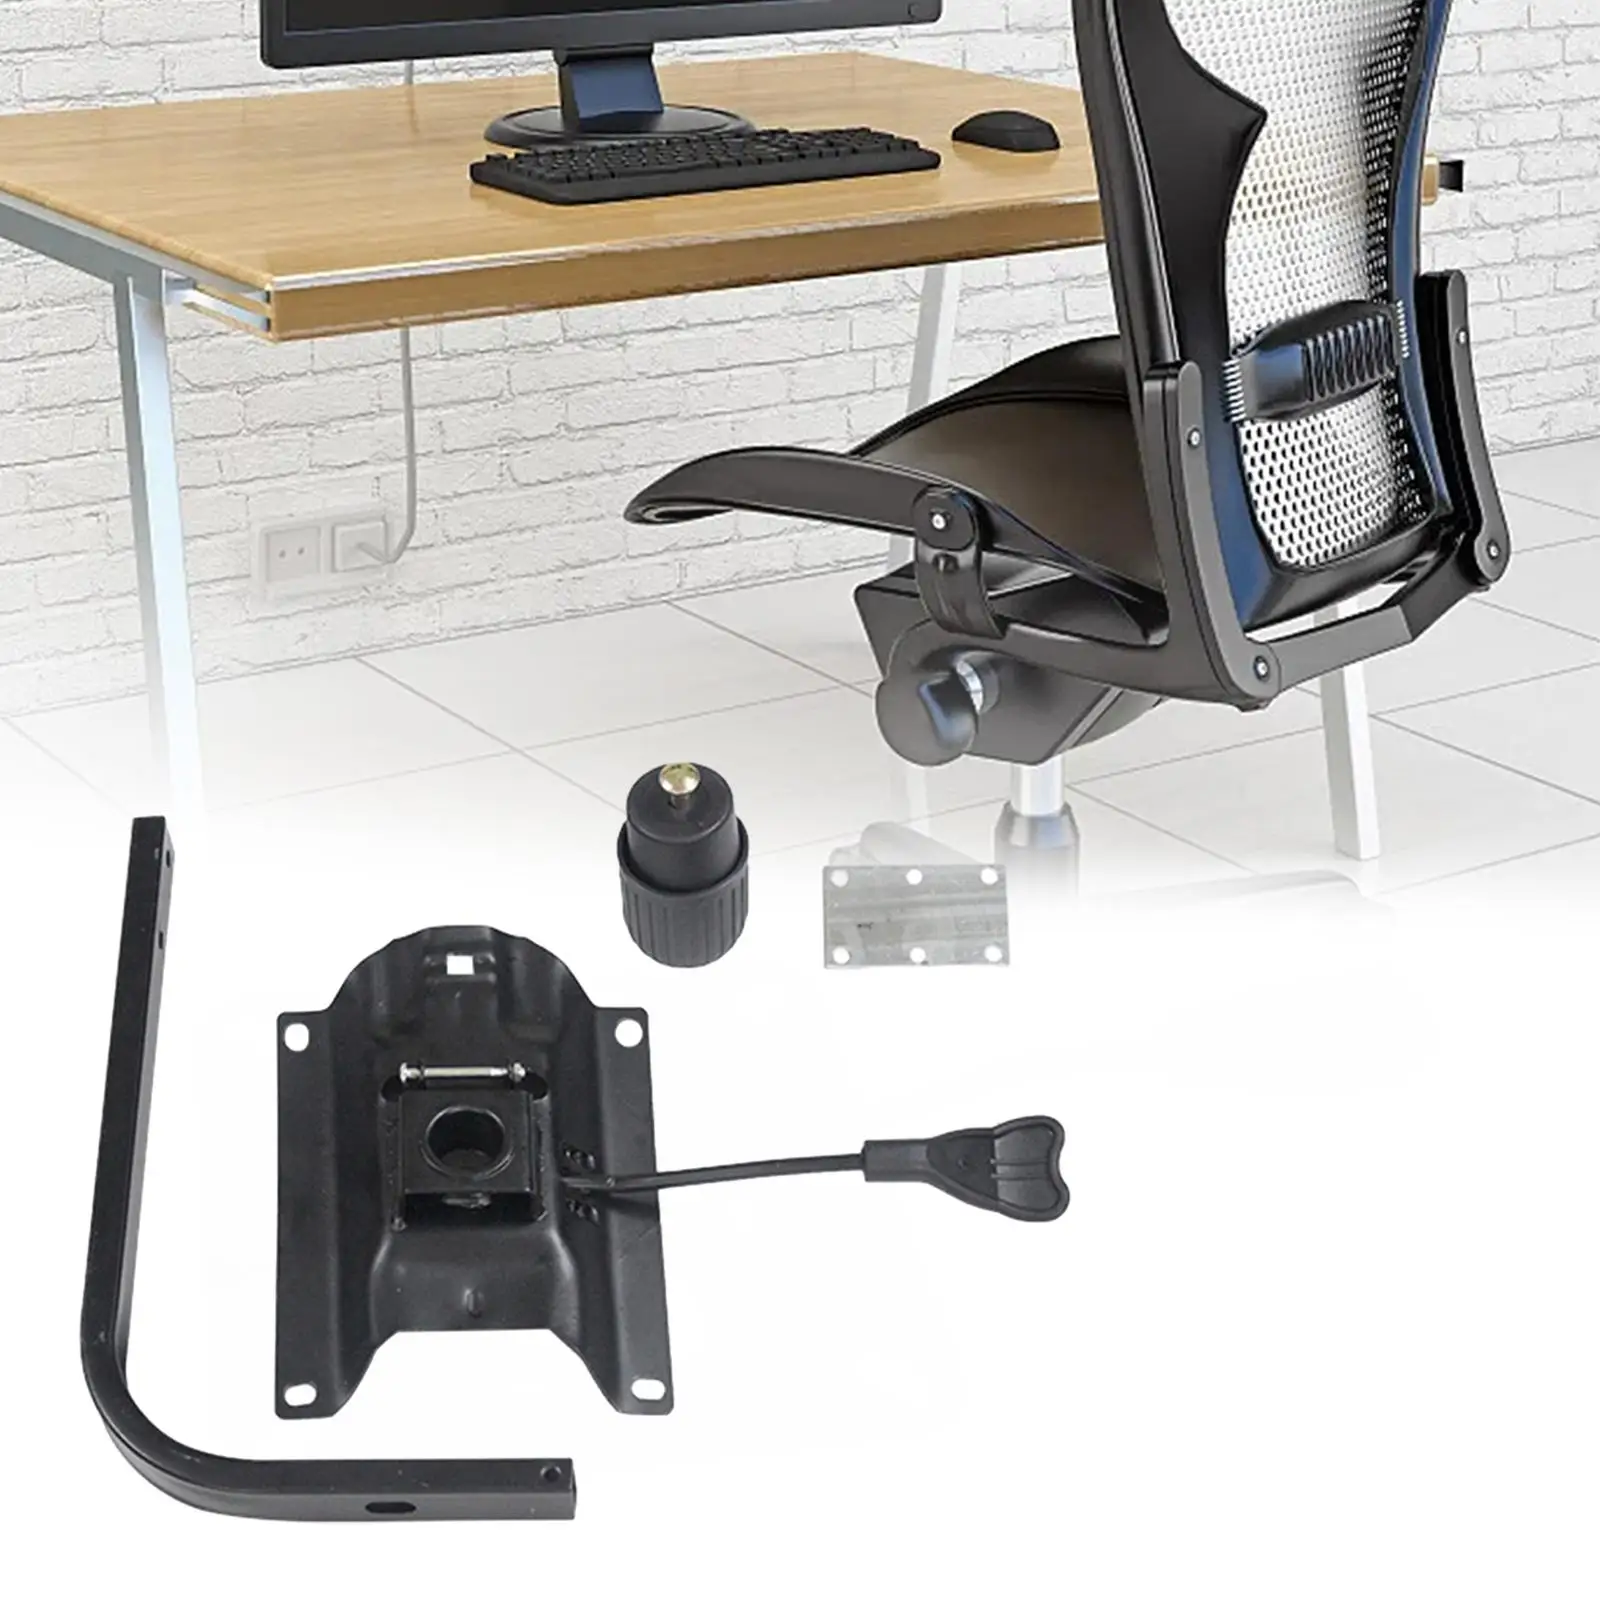 Gaming Chair Swivel Tilt Control High Bearing Metal Easy to Install Lifting Tilt Control Mechanism for Desk Chair